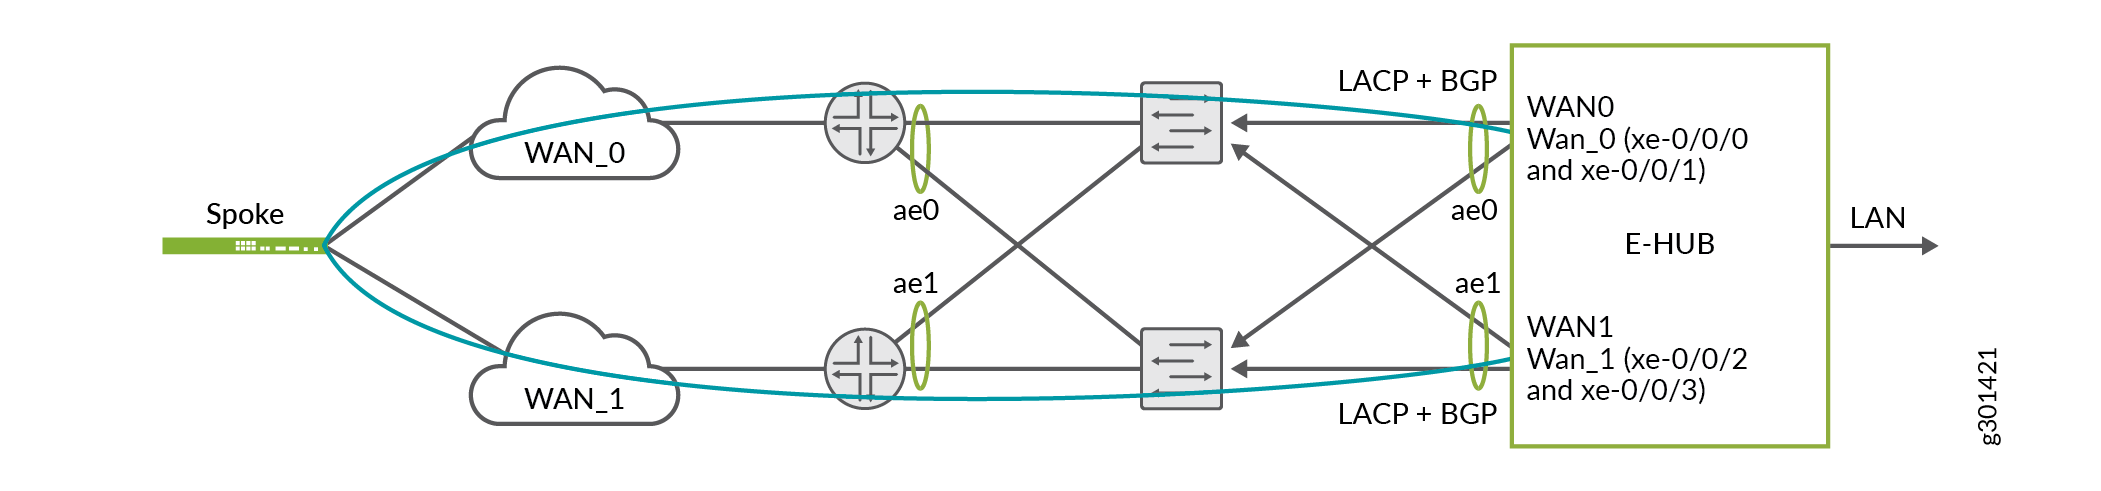 Aggregated Ethernet Topology of Enterprise
Hub WAN Links (Without
VLAN Tagging)